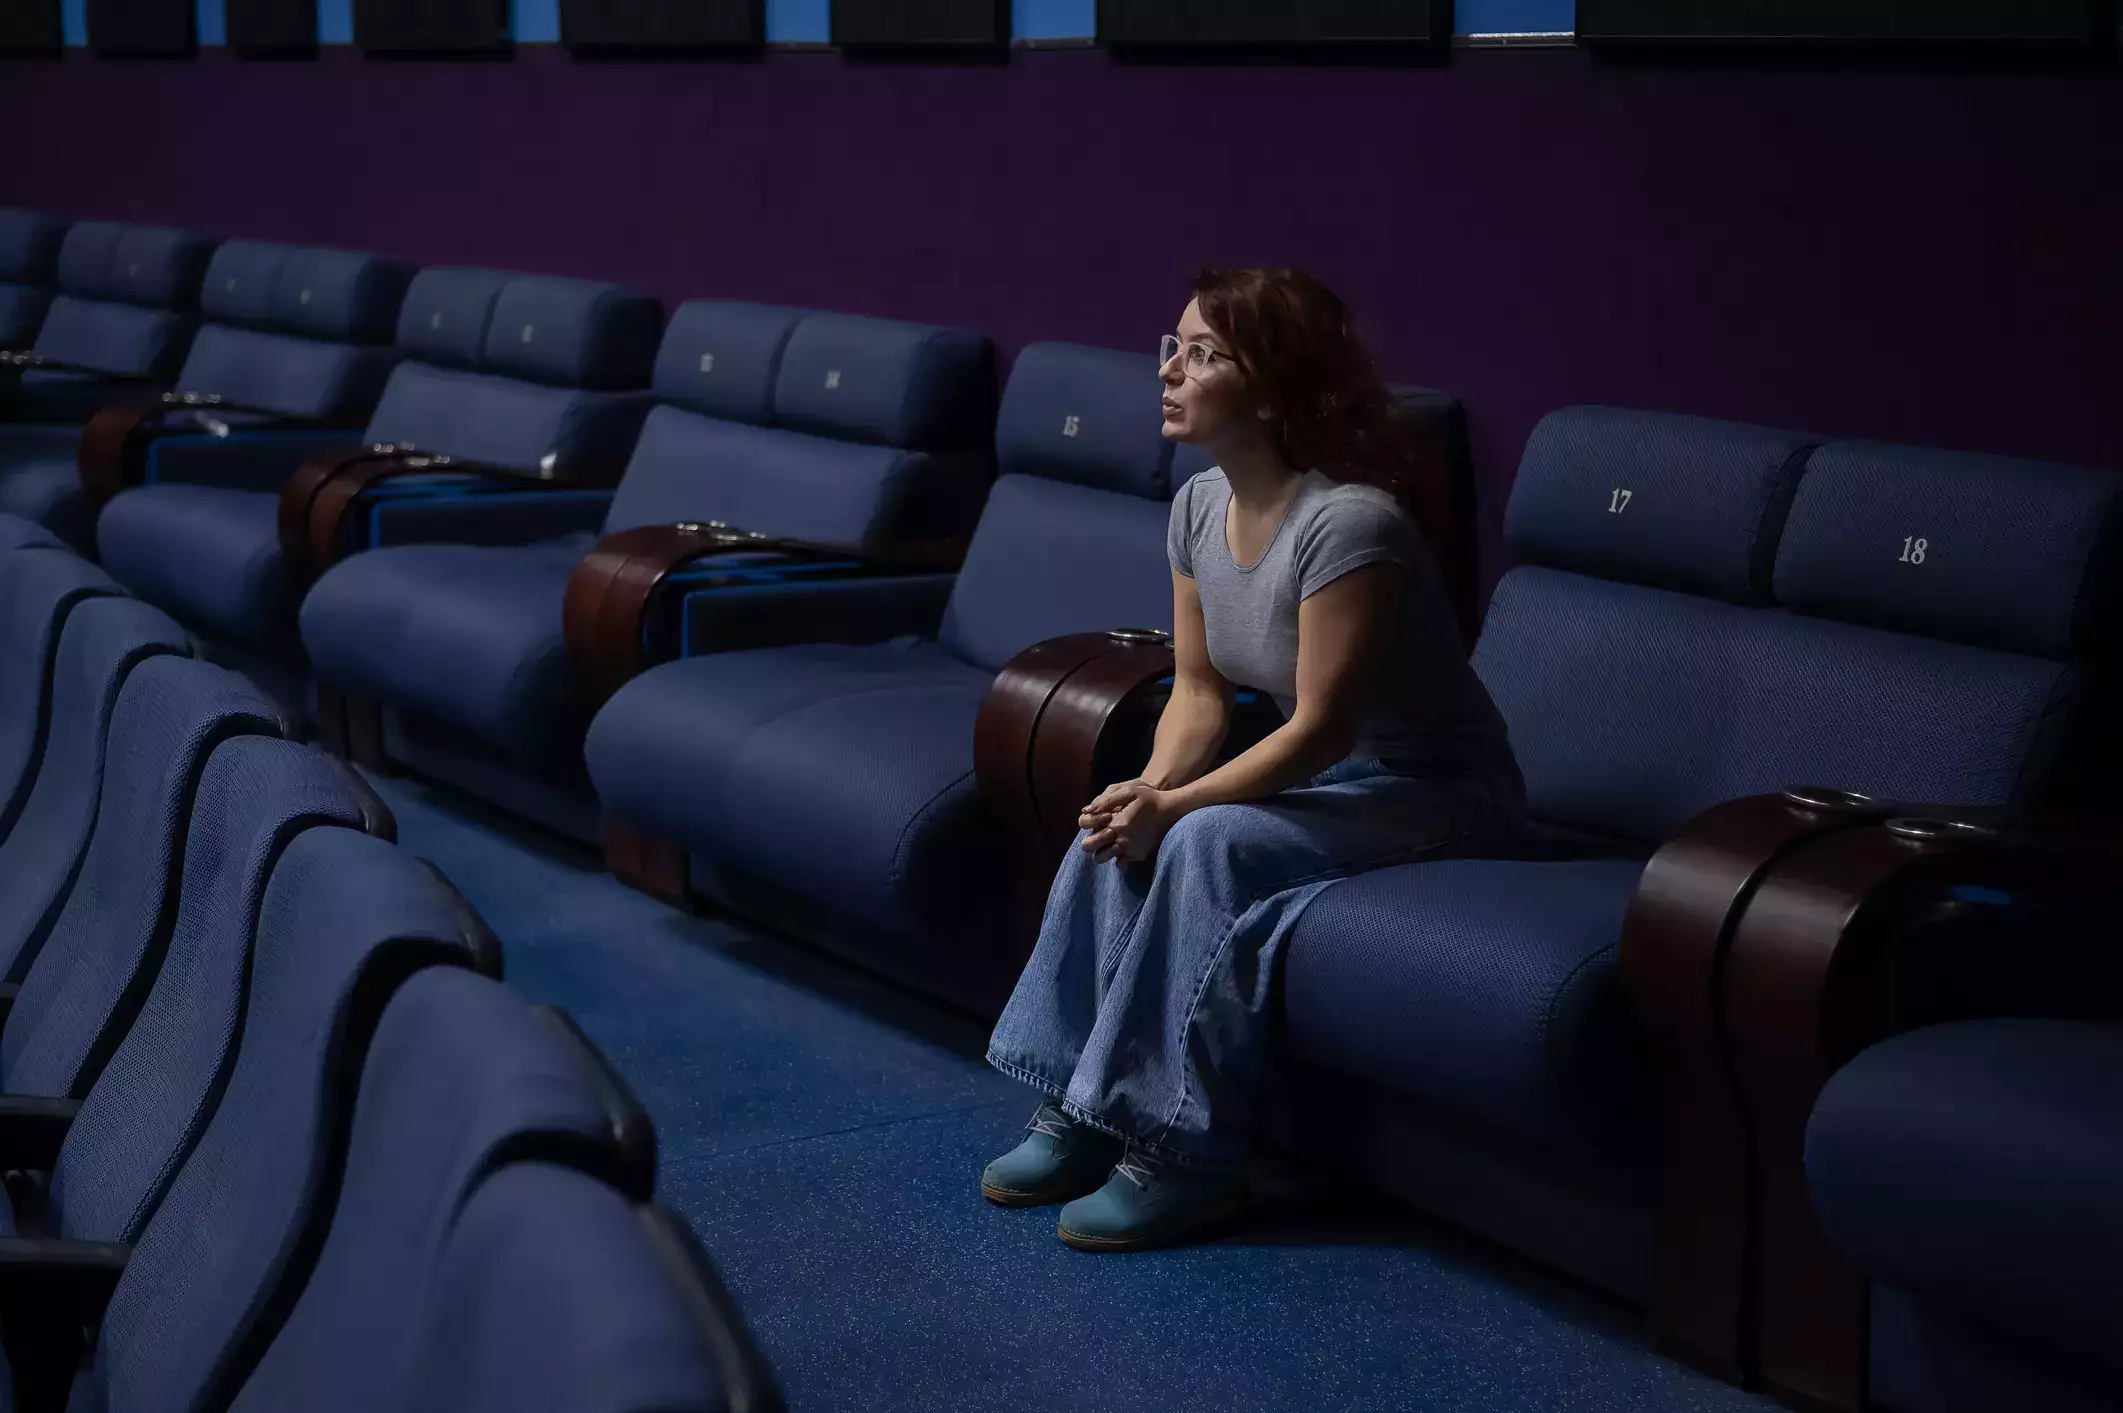 Cinema offers free entry to help Brits escape heat but only if red hai